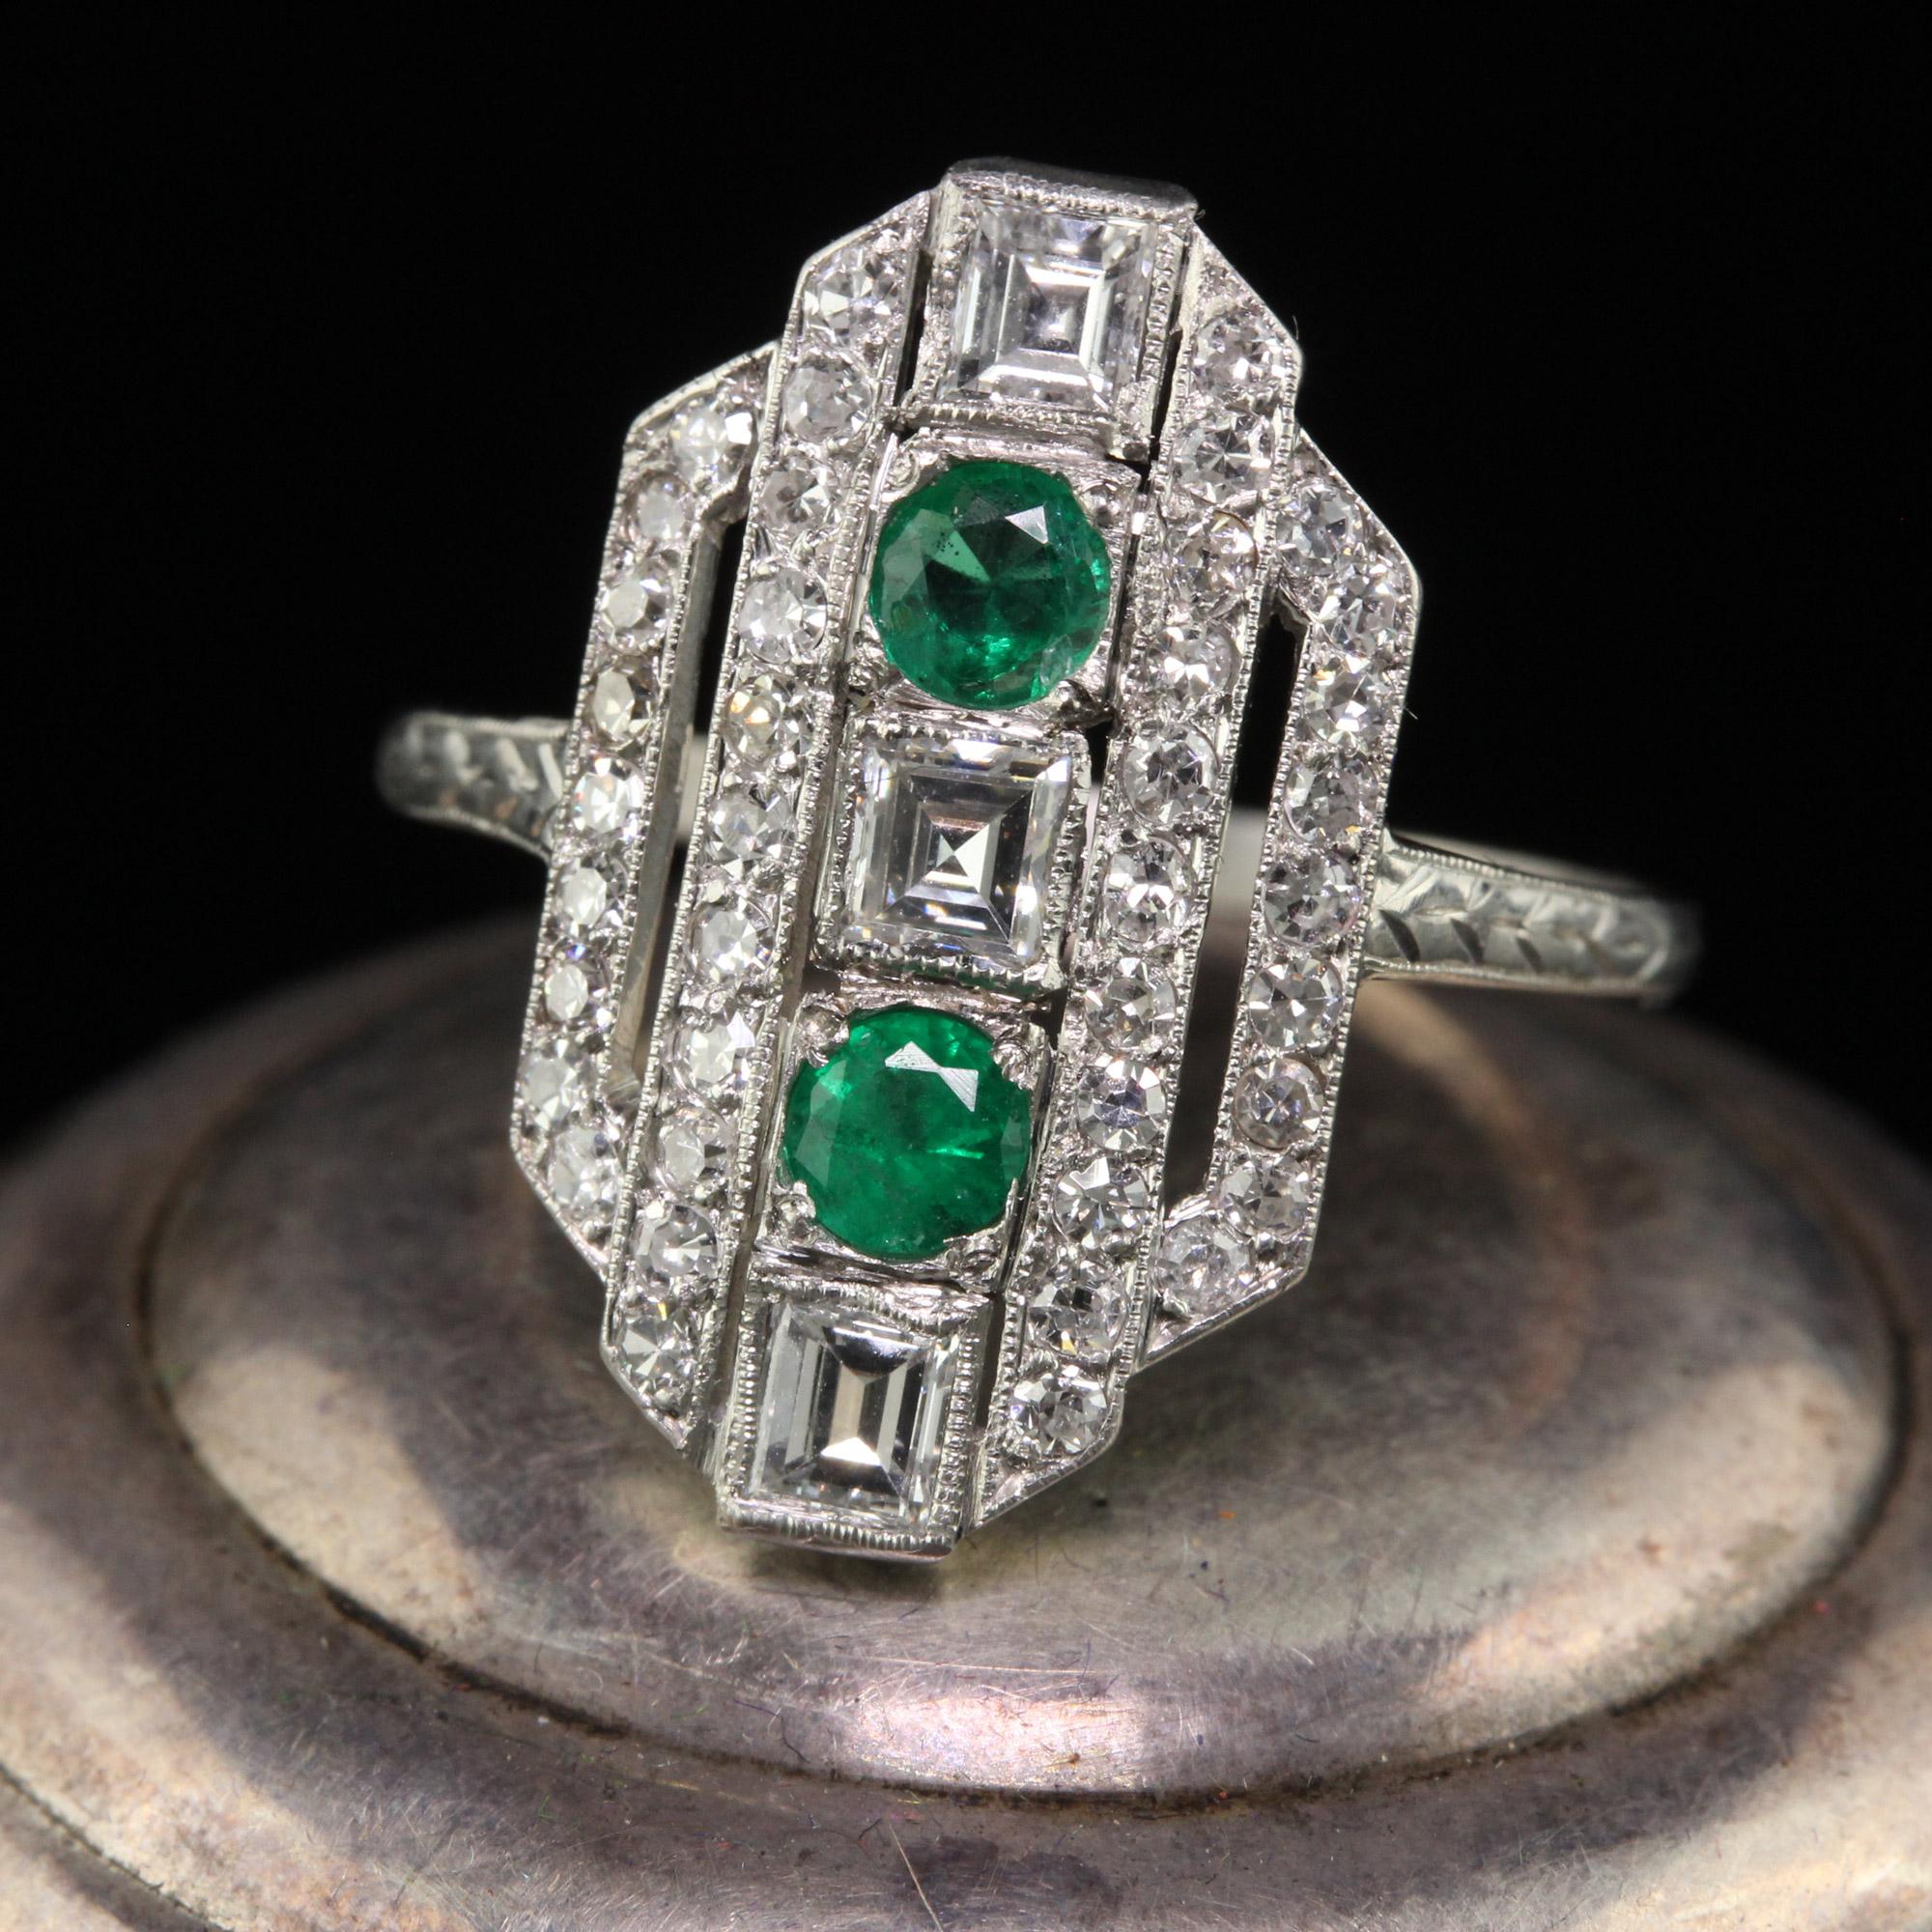 Beautiful Antique Art Deco Platinum Carre Cut Diamond and Emerald Shield Ring - Size 6 3/4. This incredible shield ring is crafted in platinum. The ring has beautiful single cut diamonds, carre cut diamonds, and Colombian emeralds. This gorgeous